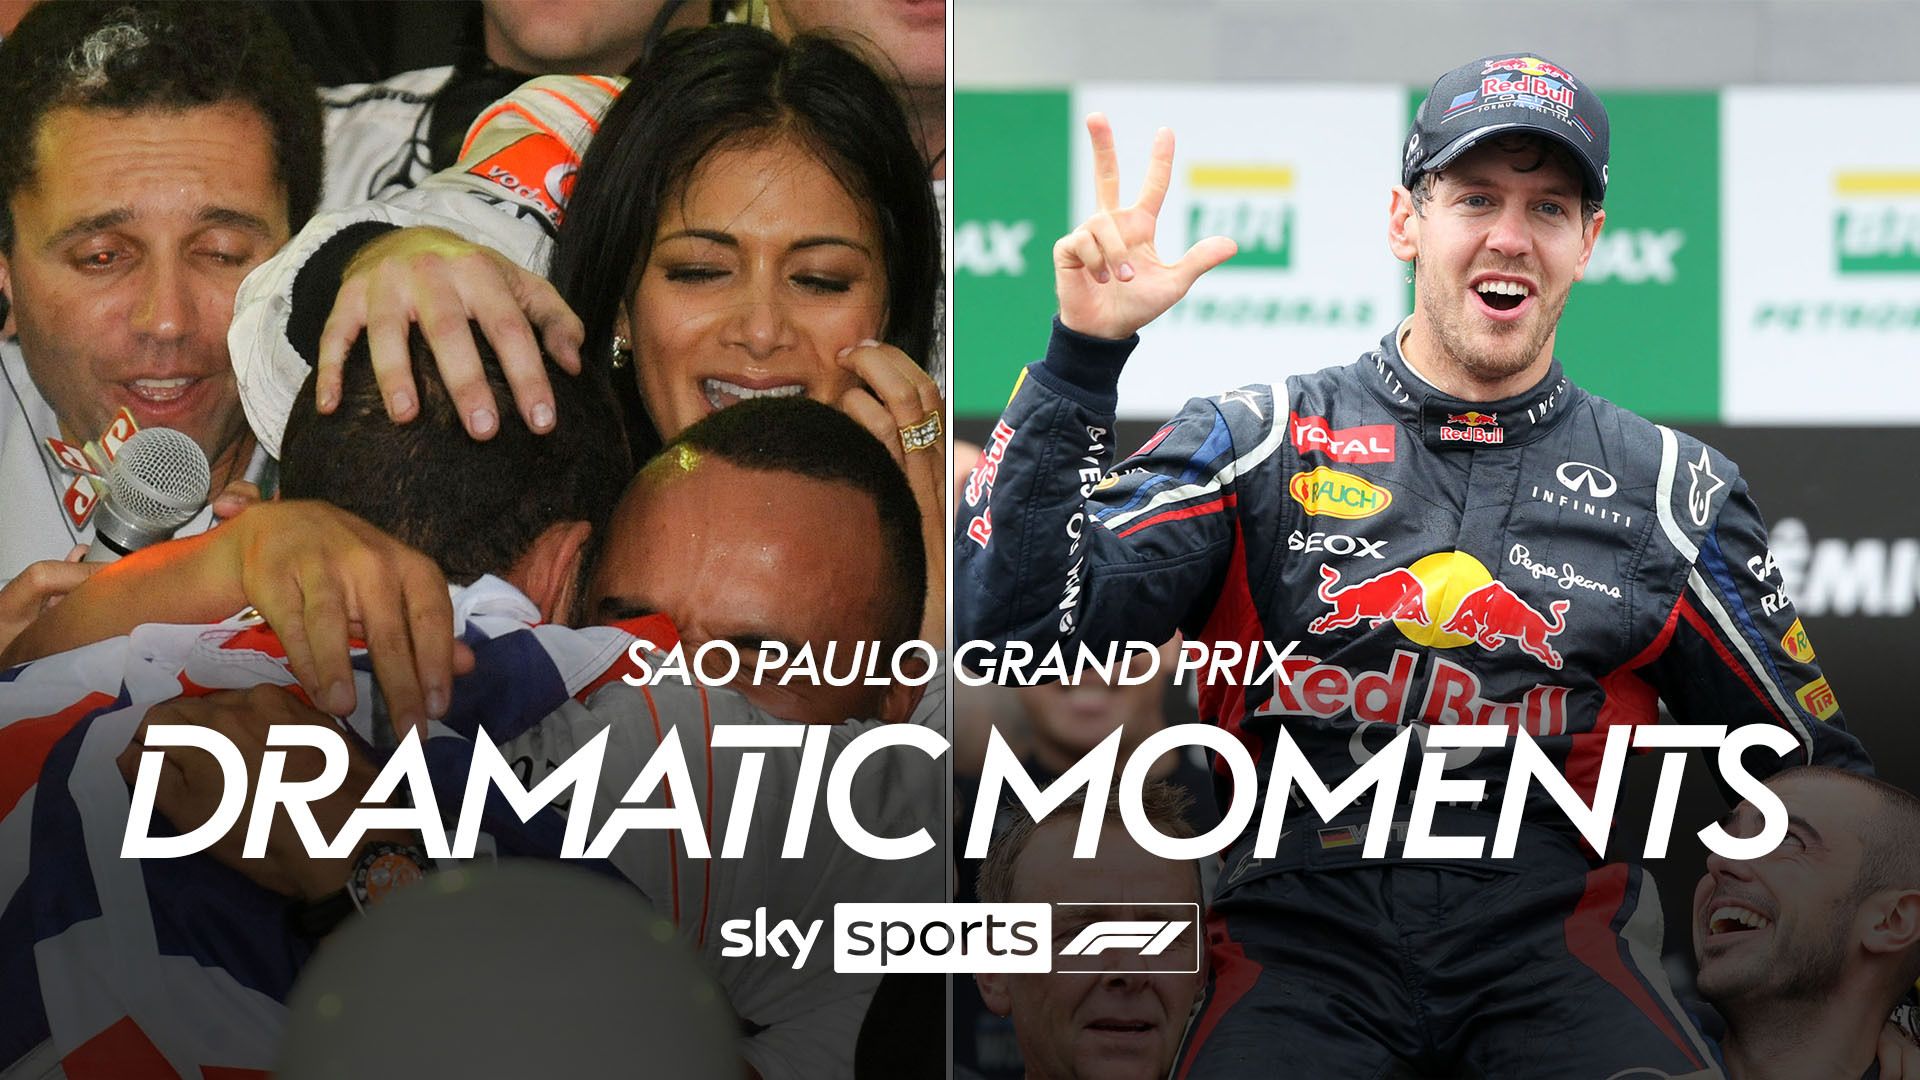 The most dramatic moments from the Sao Paulo Grand Prix